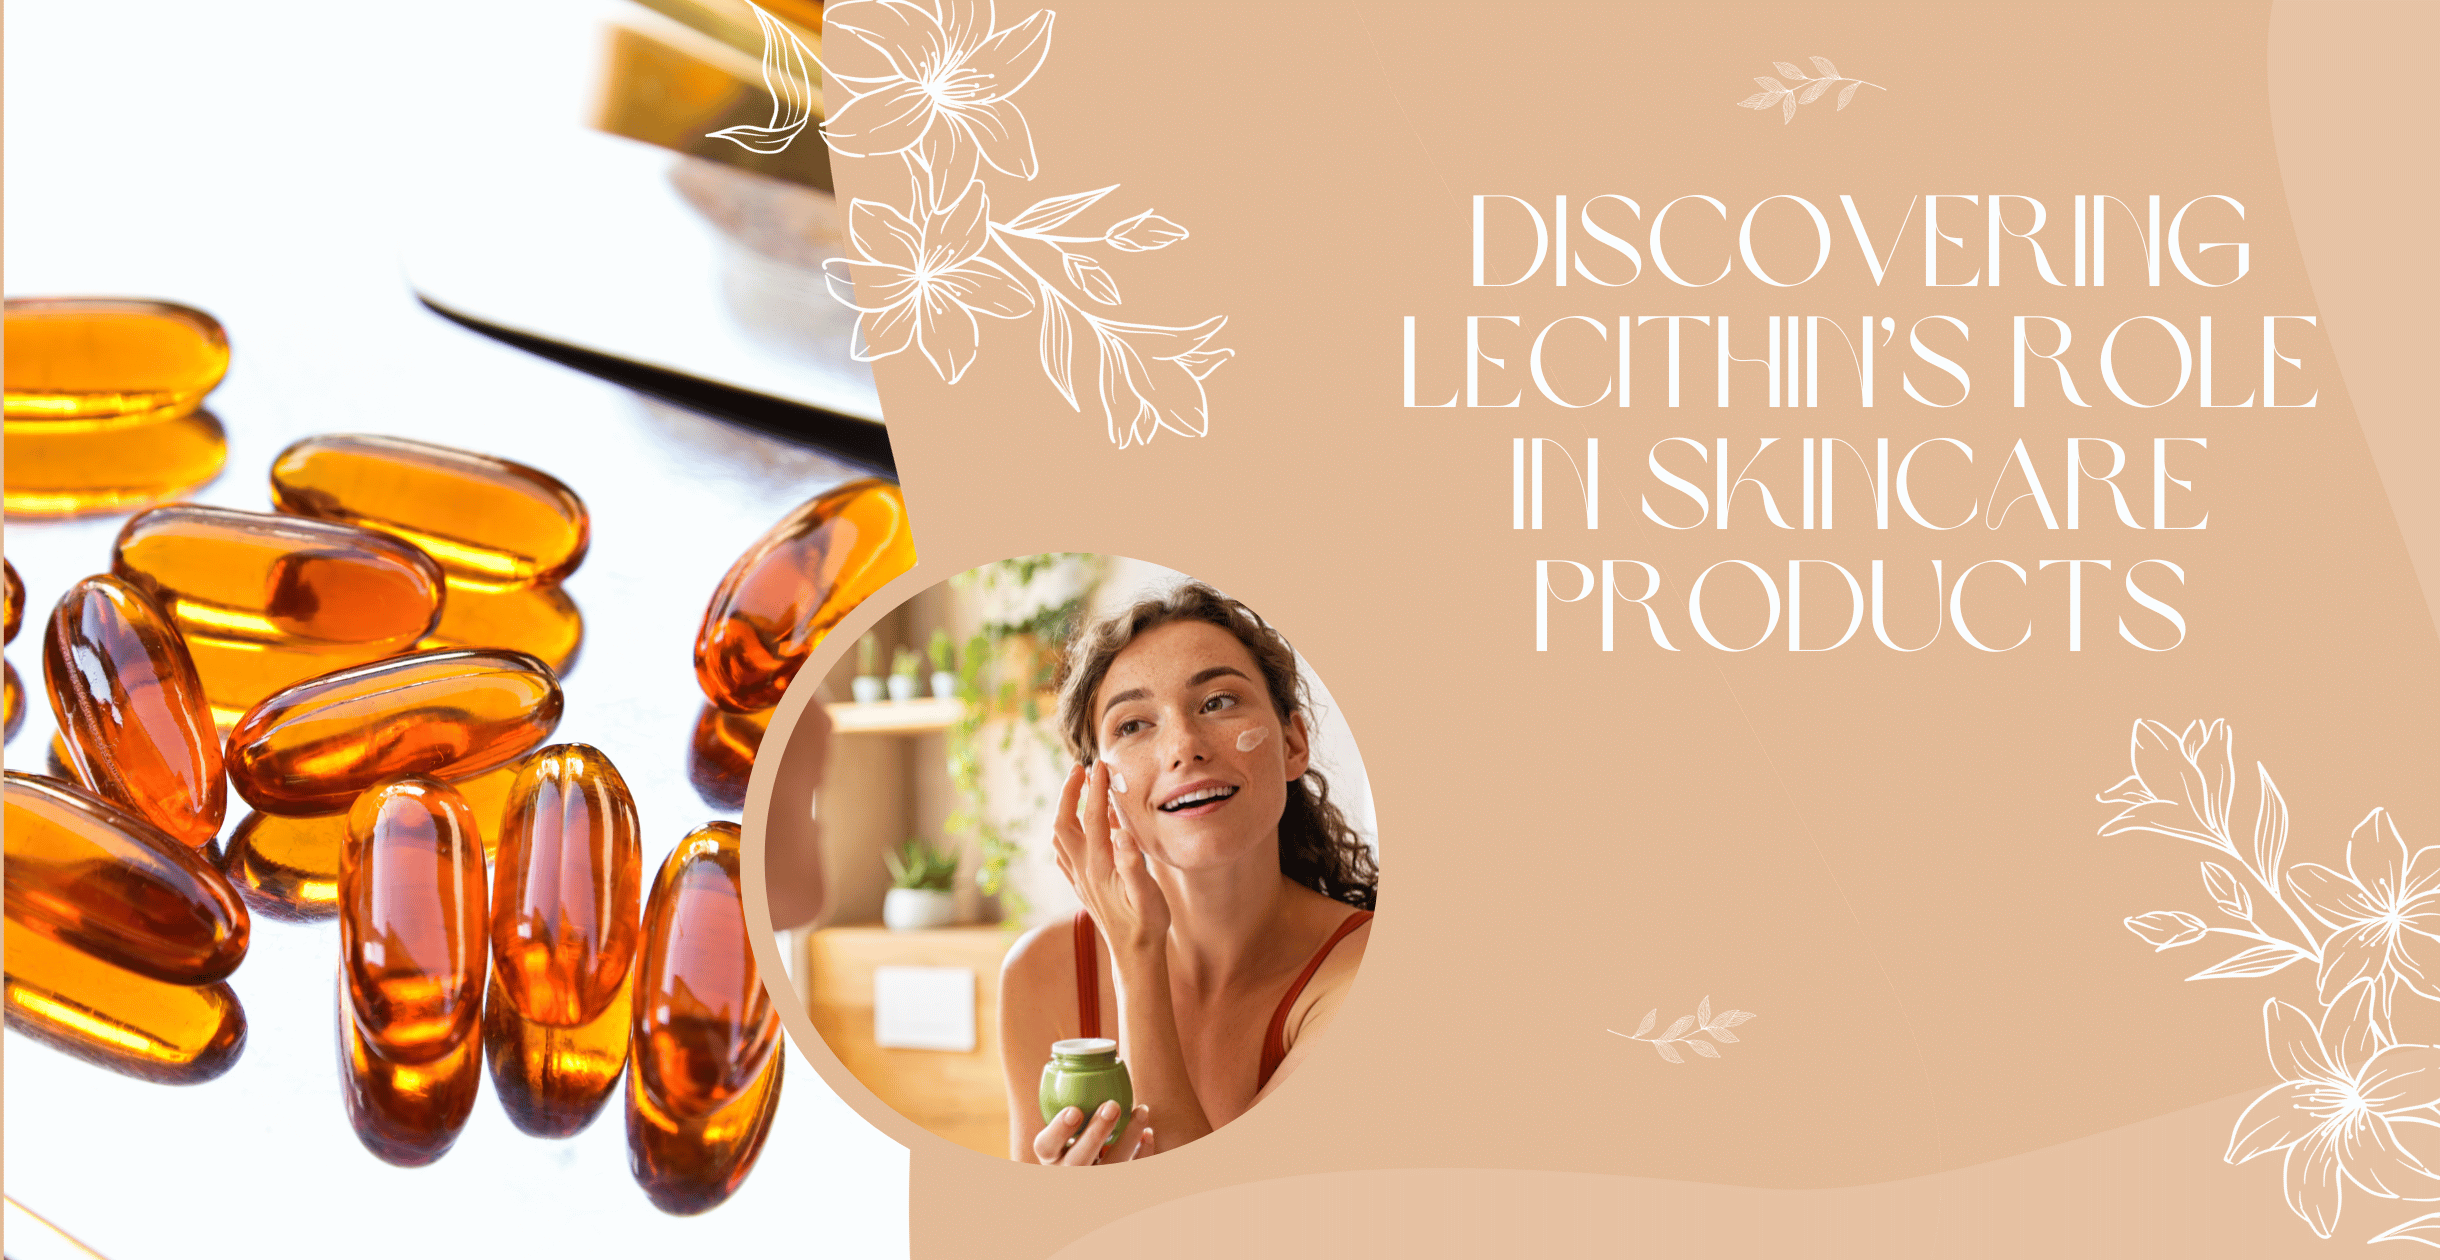 Discovering Lecithin’s Role in Skincare Products